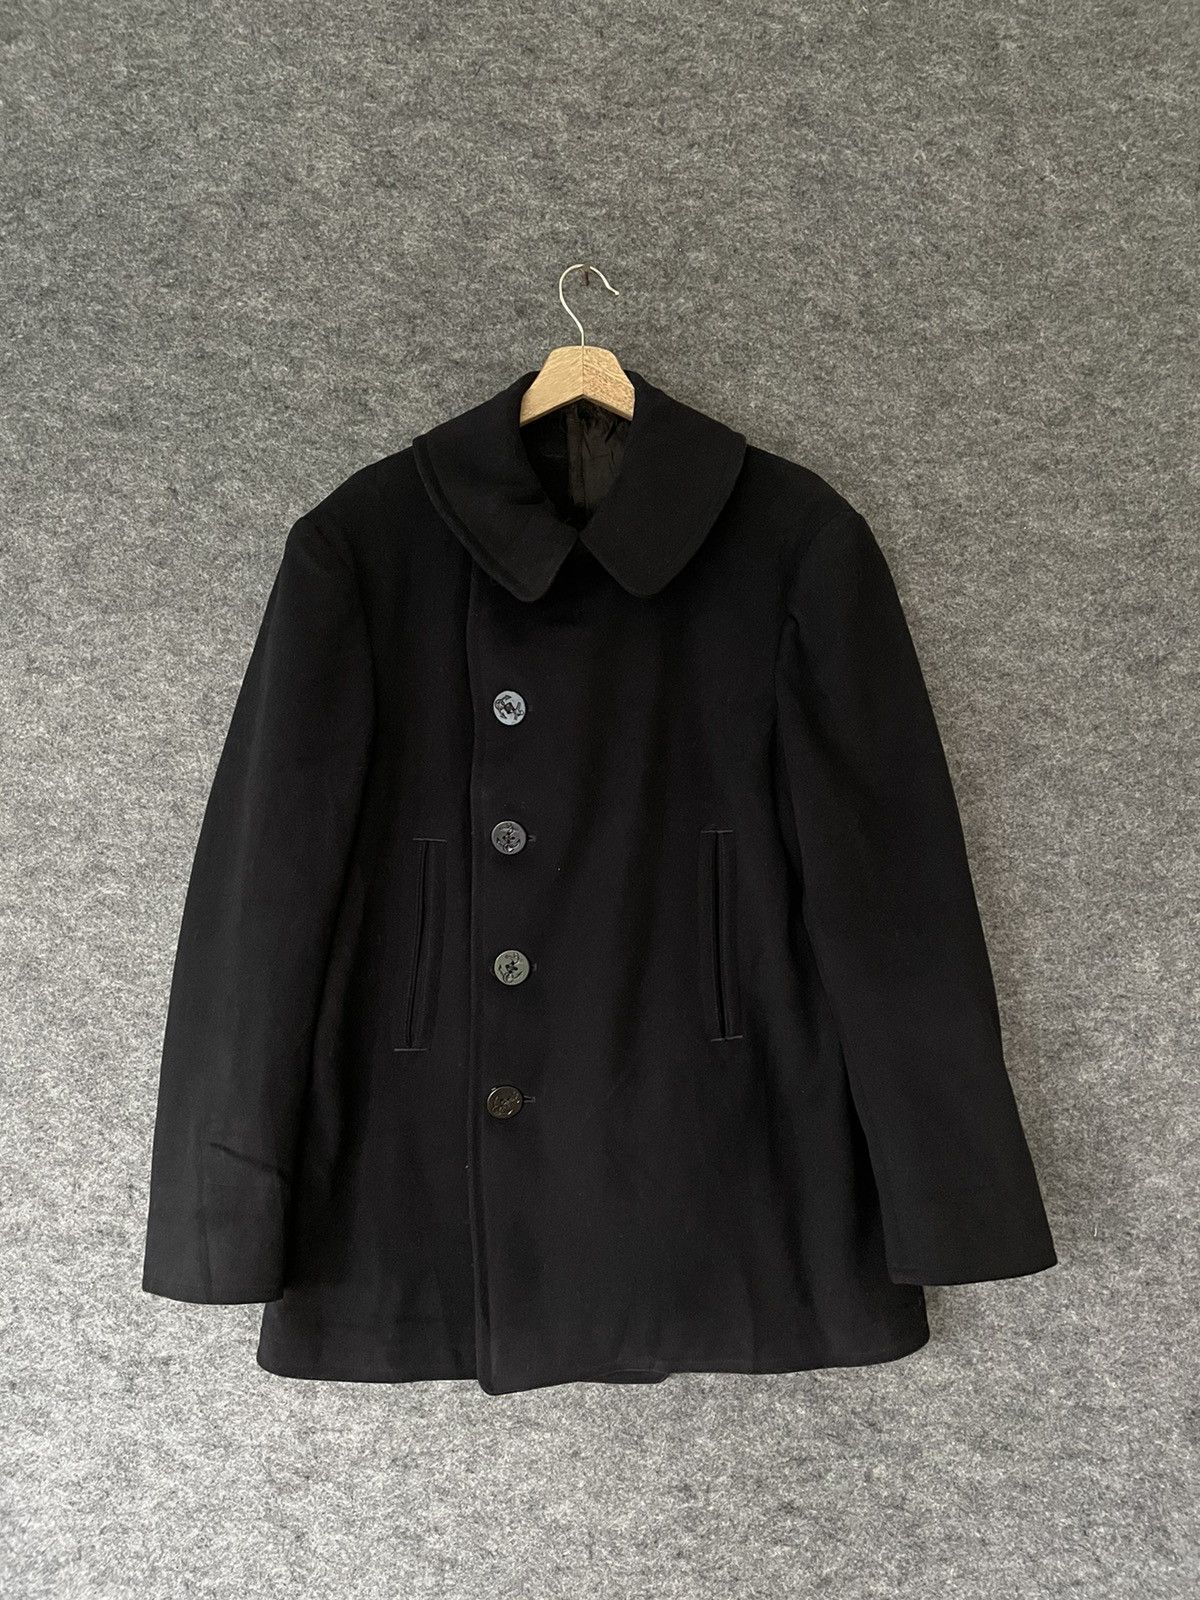 Mister Freedom WWII NAVY PEACOAT | Grailed